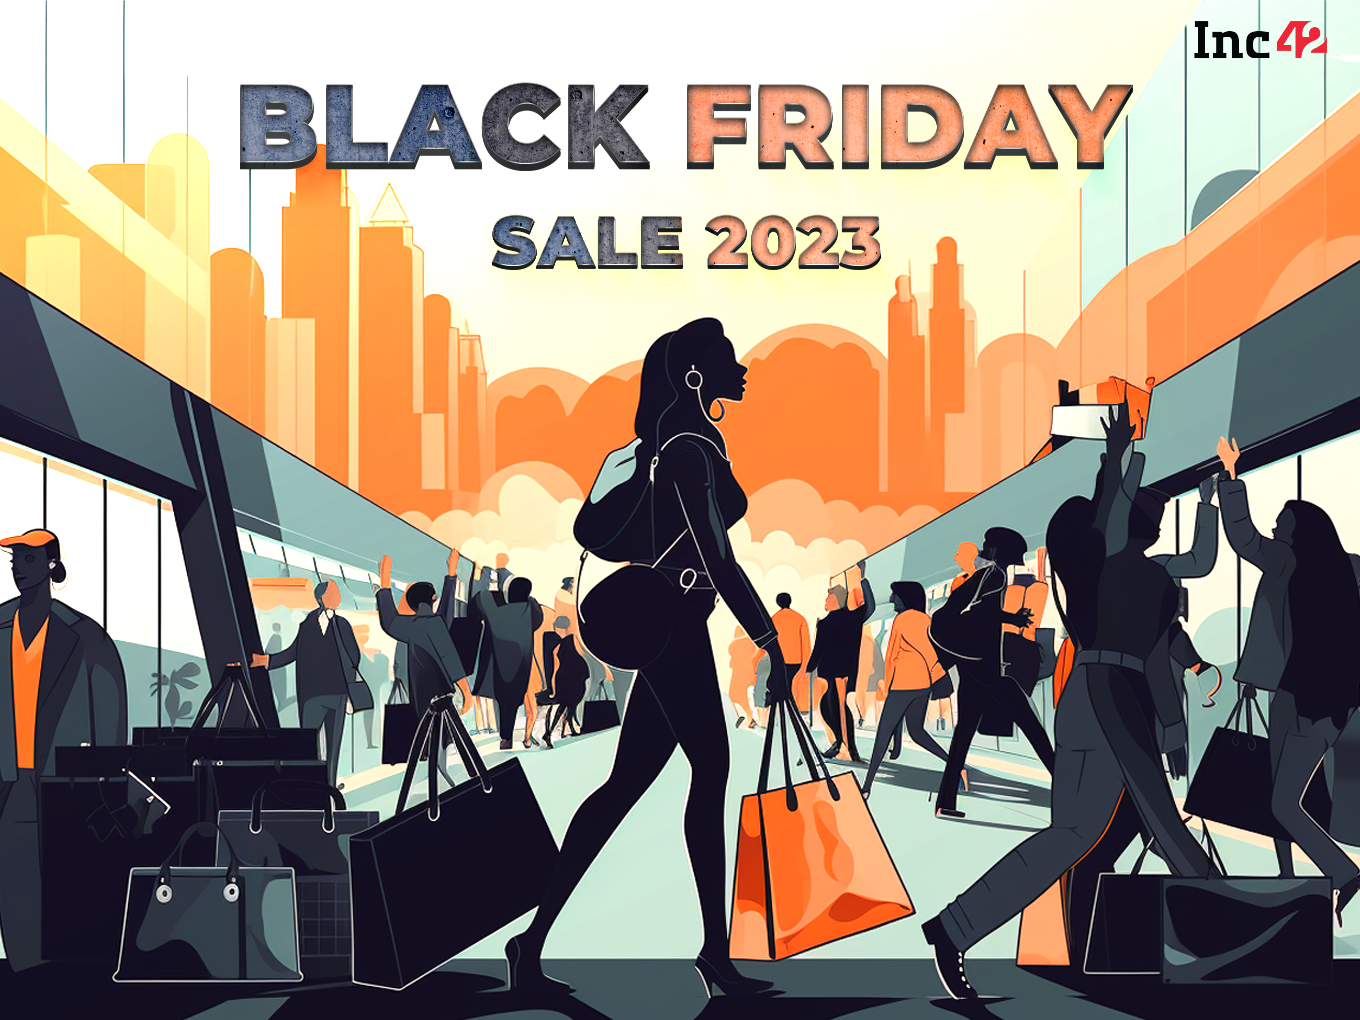 How Ecommerce And D2C Brands Are Gearing Up For A Blockbuster Black Friday Shopping Spree